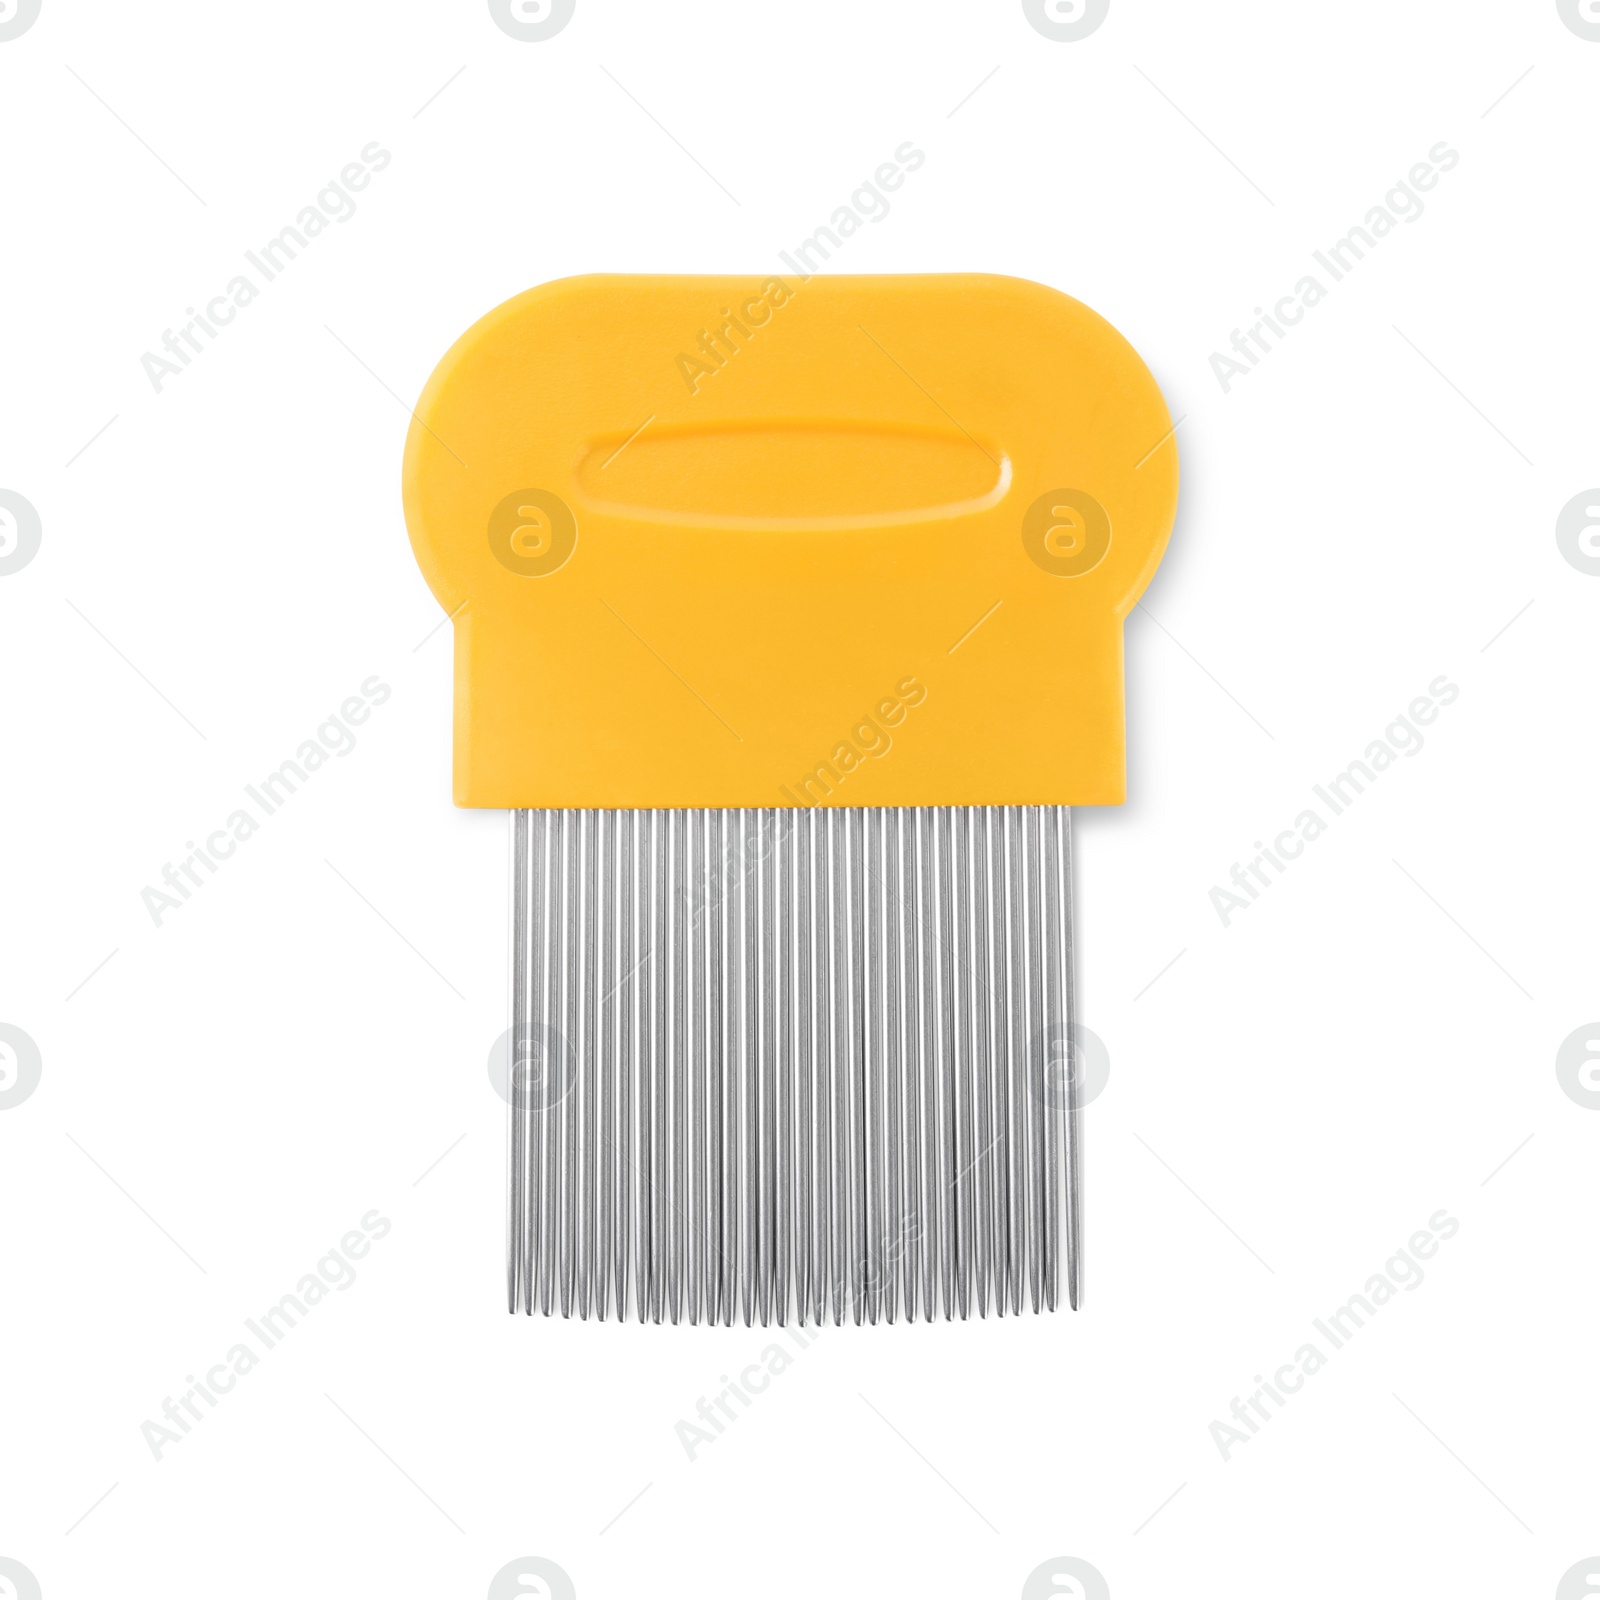 Photo of Metal comb for anti lice treatment on white background, top view